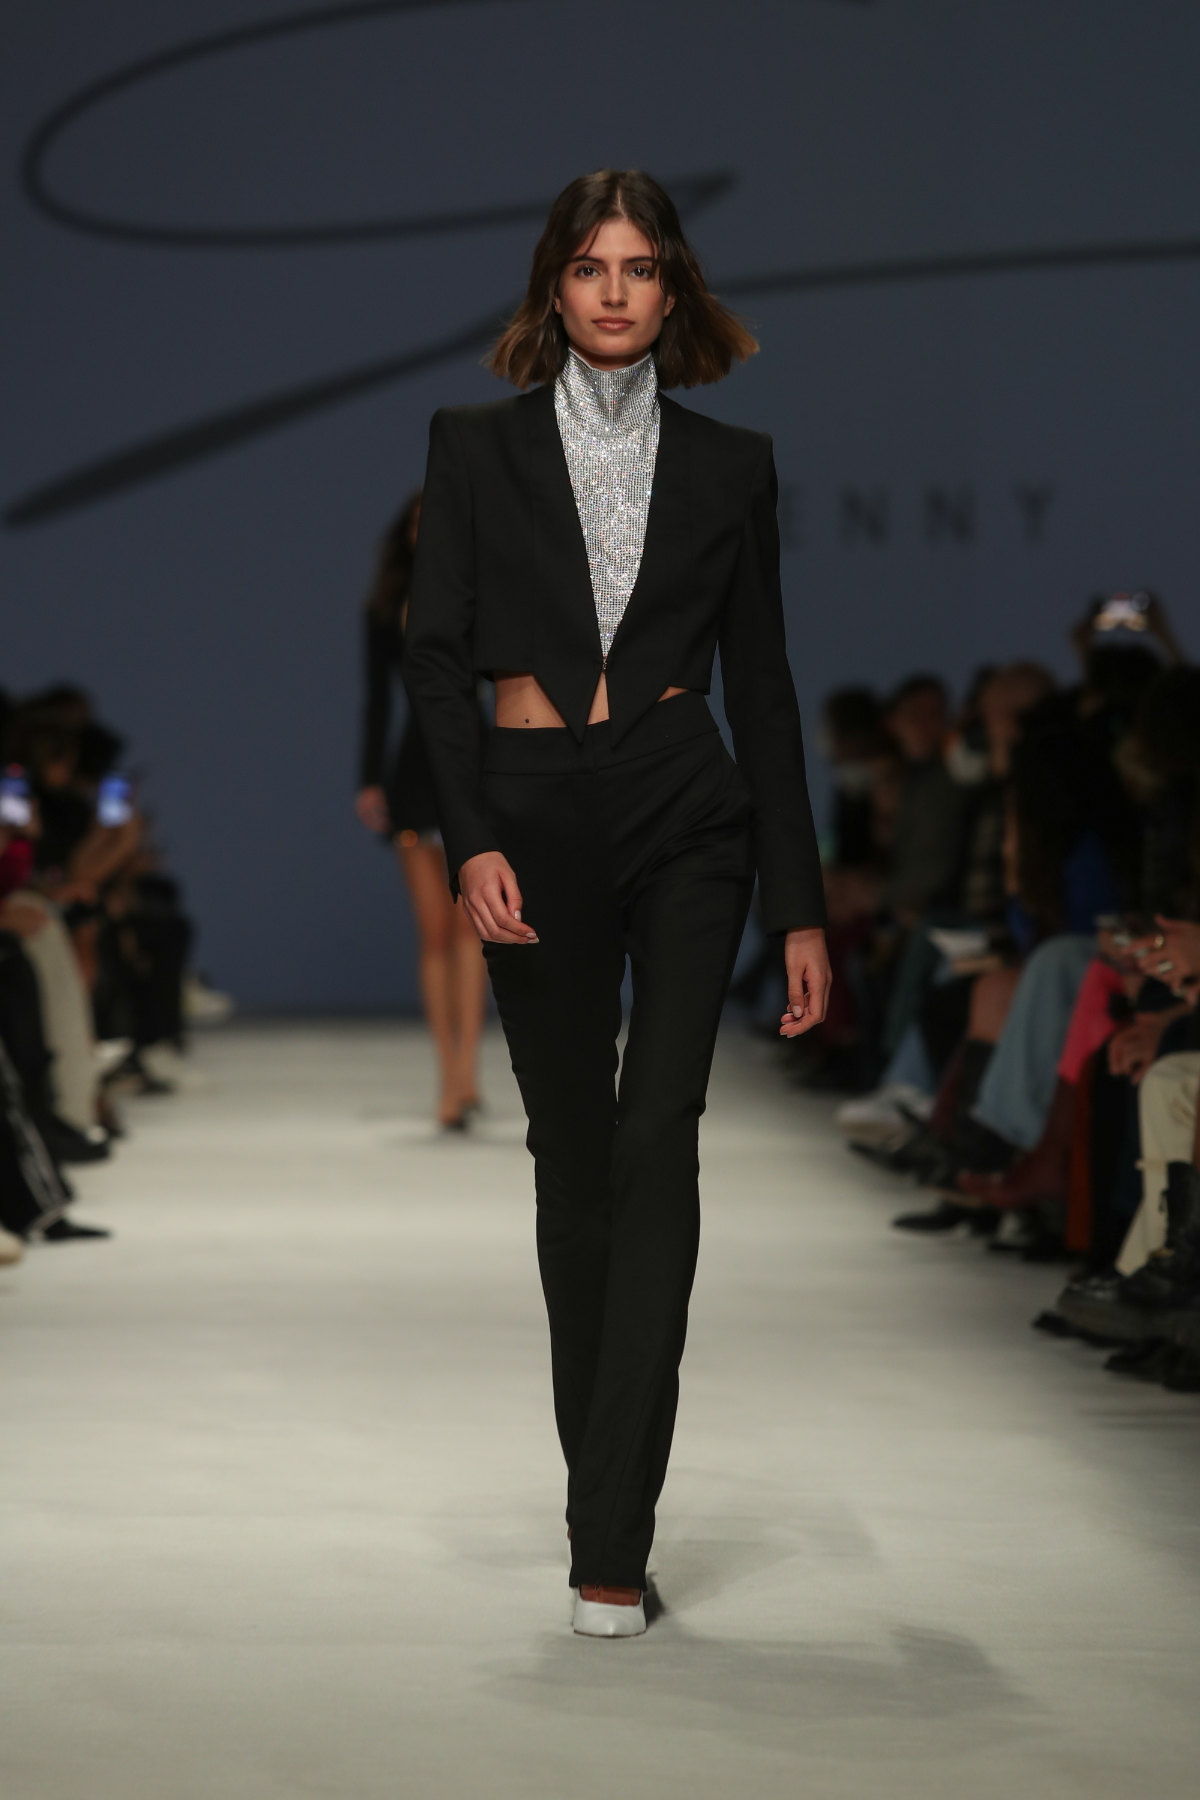 Genny Presents Its New Autumn Winter 2022/2023 Collection